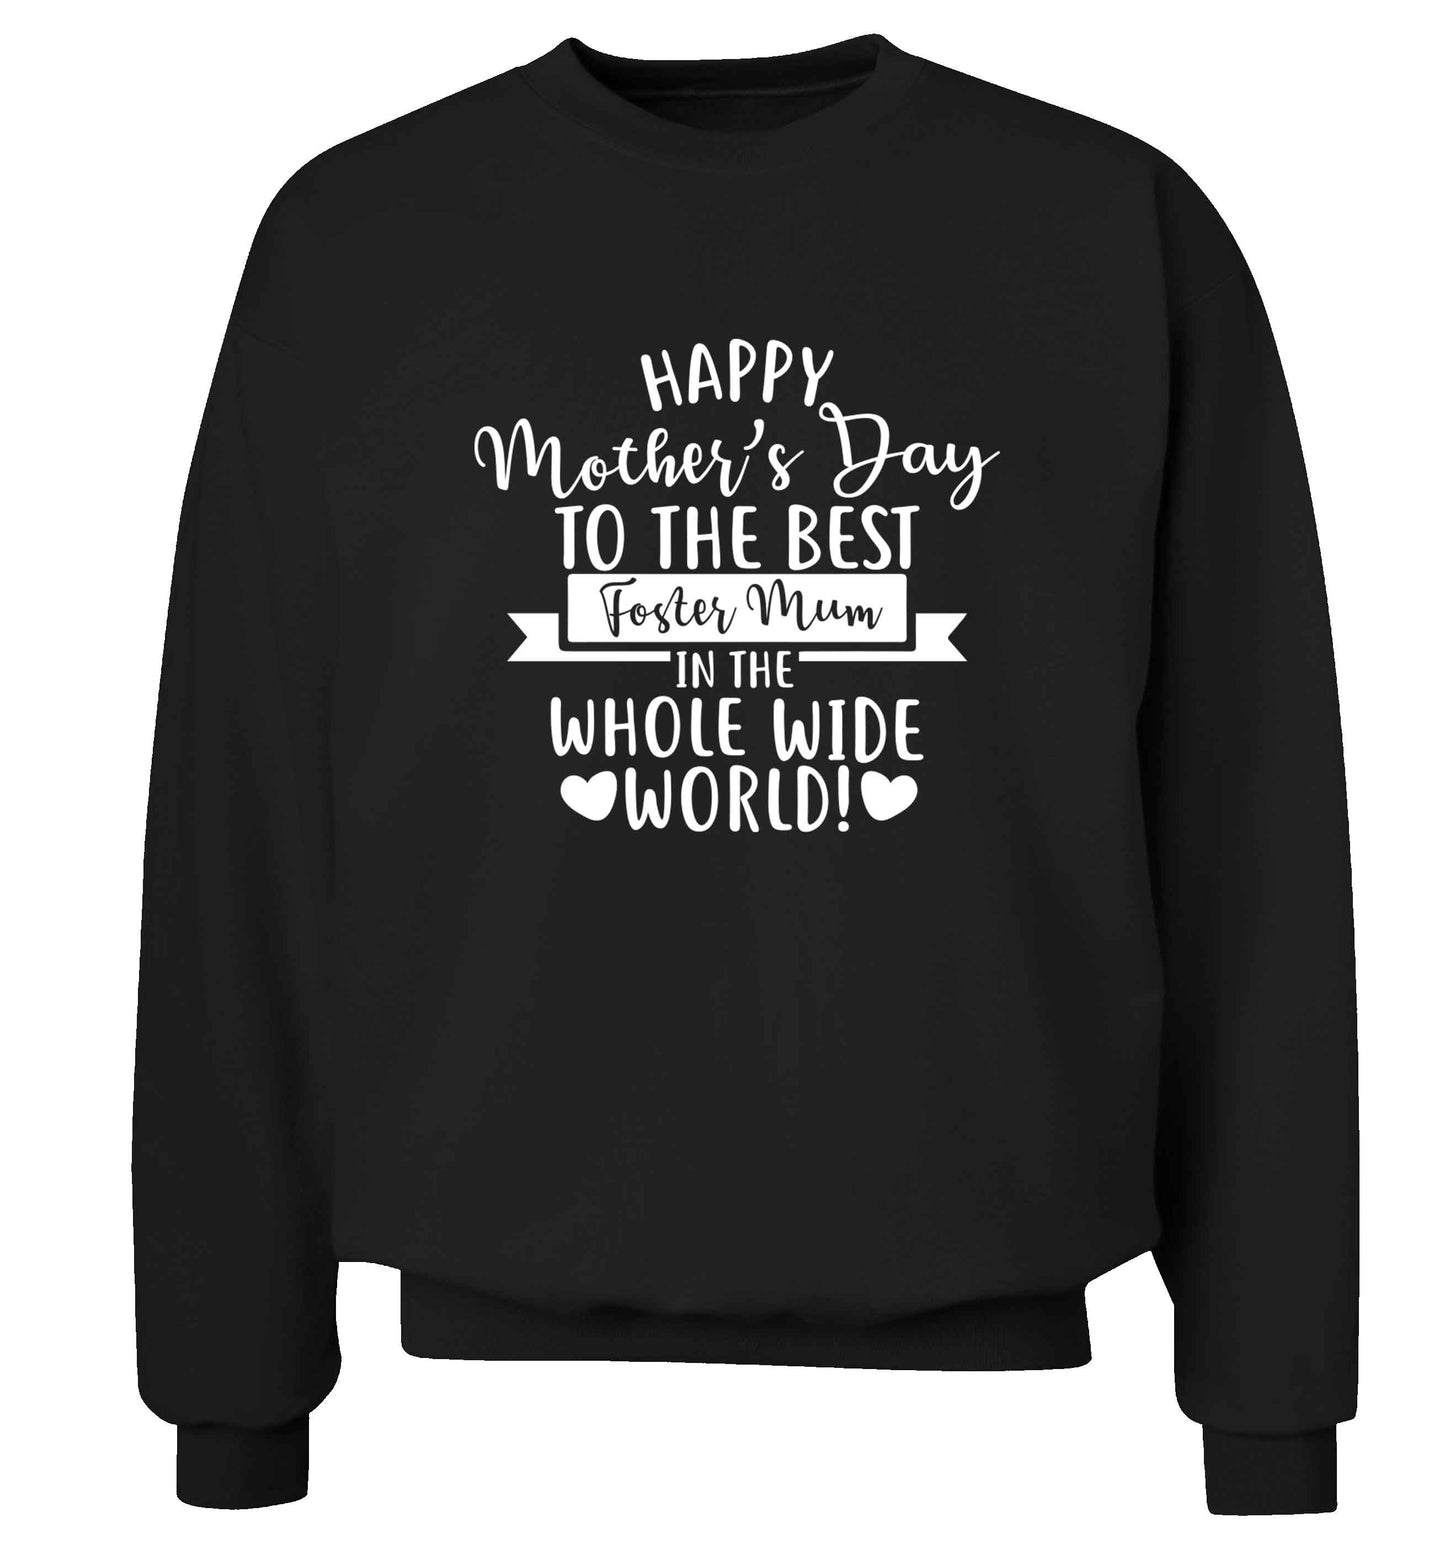 Happy mother's day to the best foster mum in the world adult's unisex black sweater 2XL